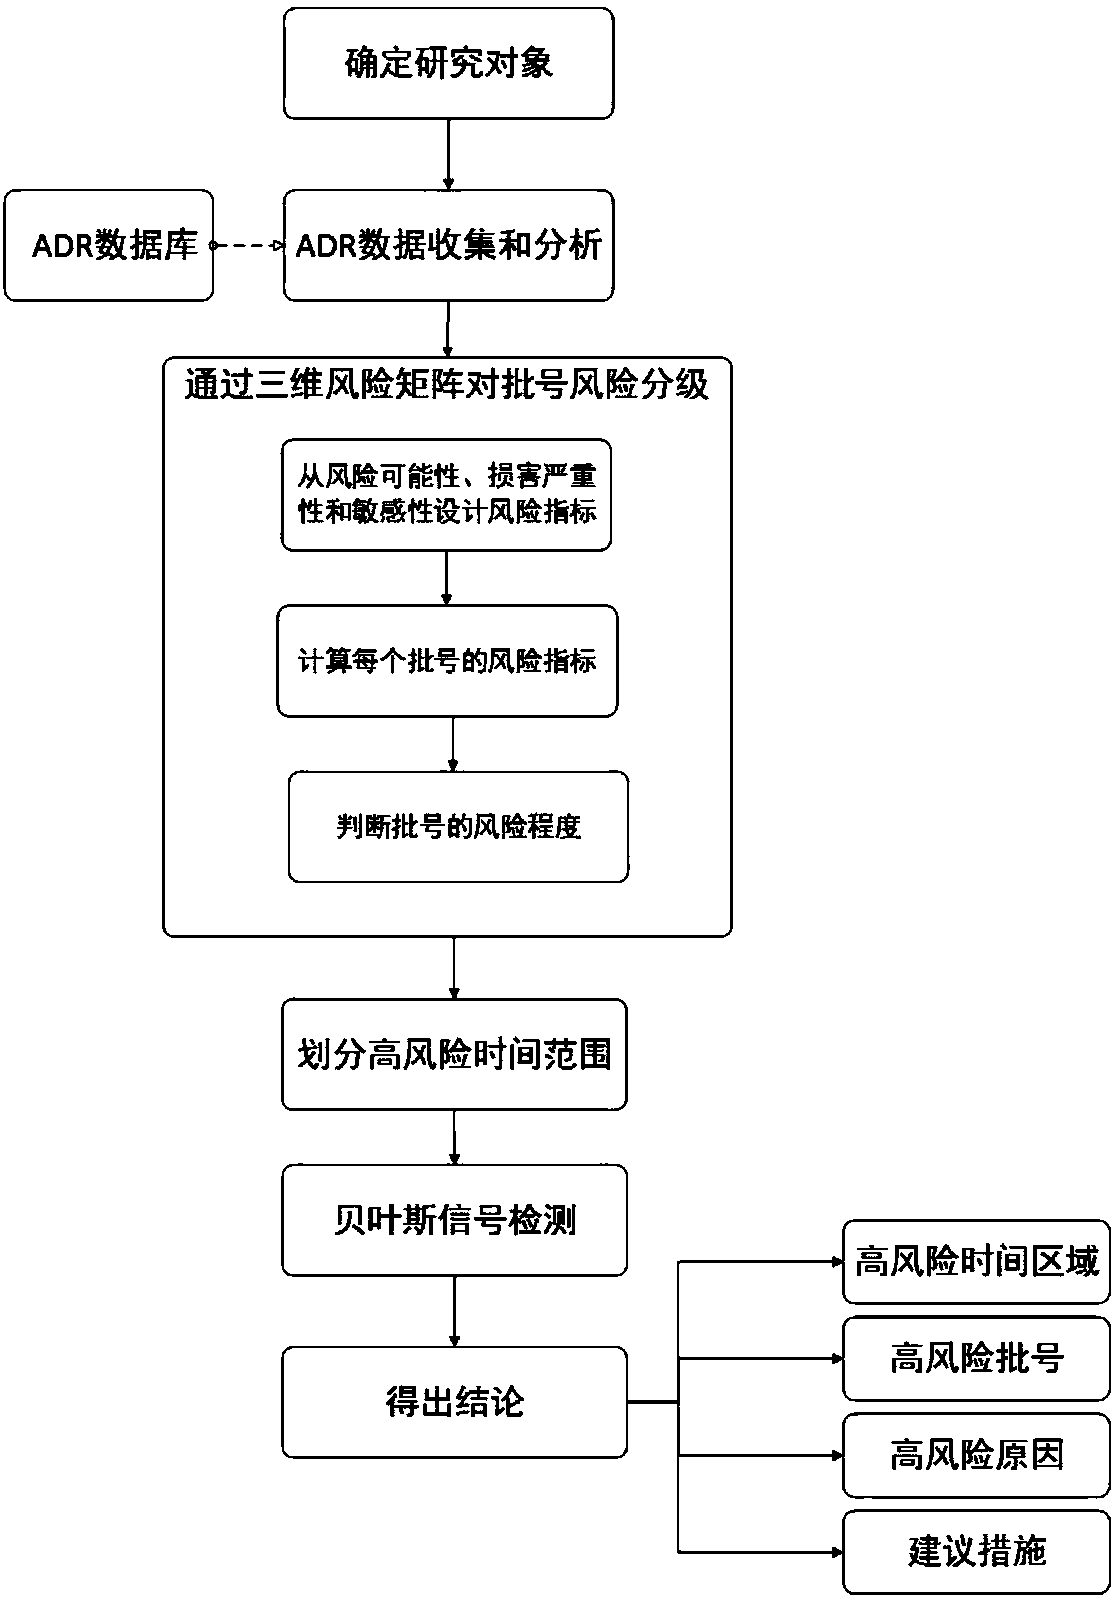 Method for identifying production risk of drug production enterprise, and automatic early warning system